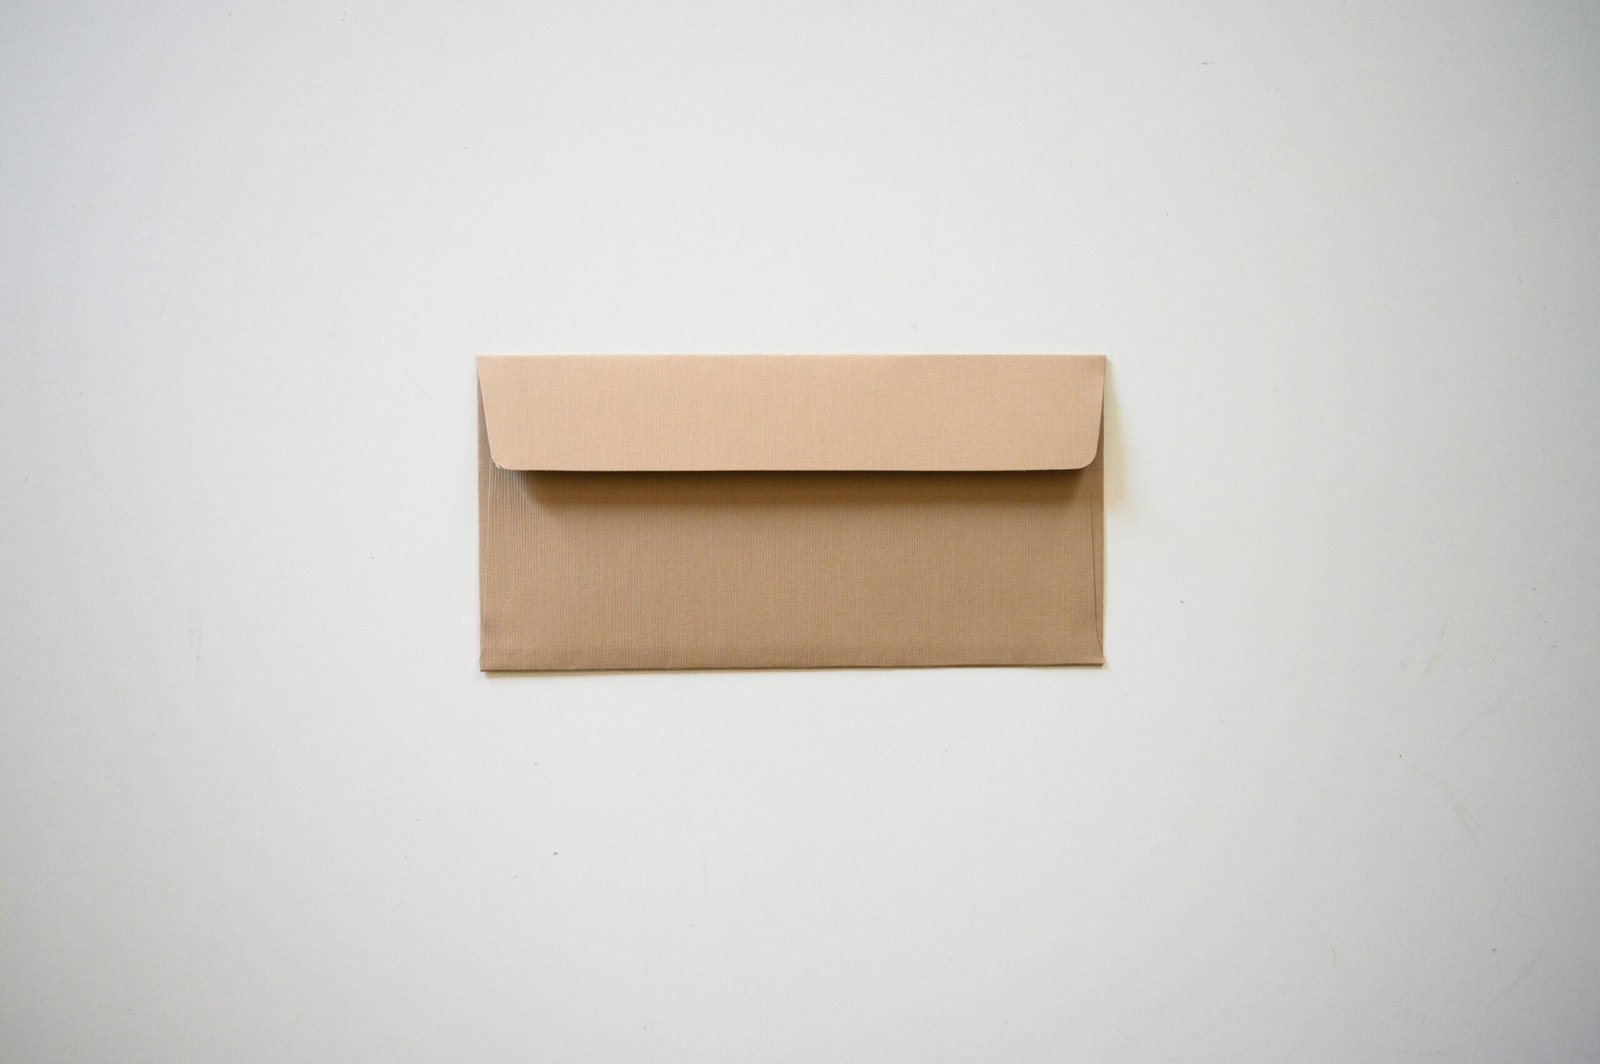 What Do You Use To Address Envelopes For A Family Of Four?